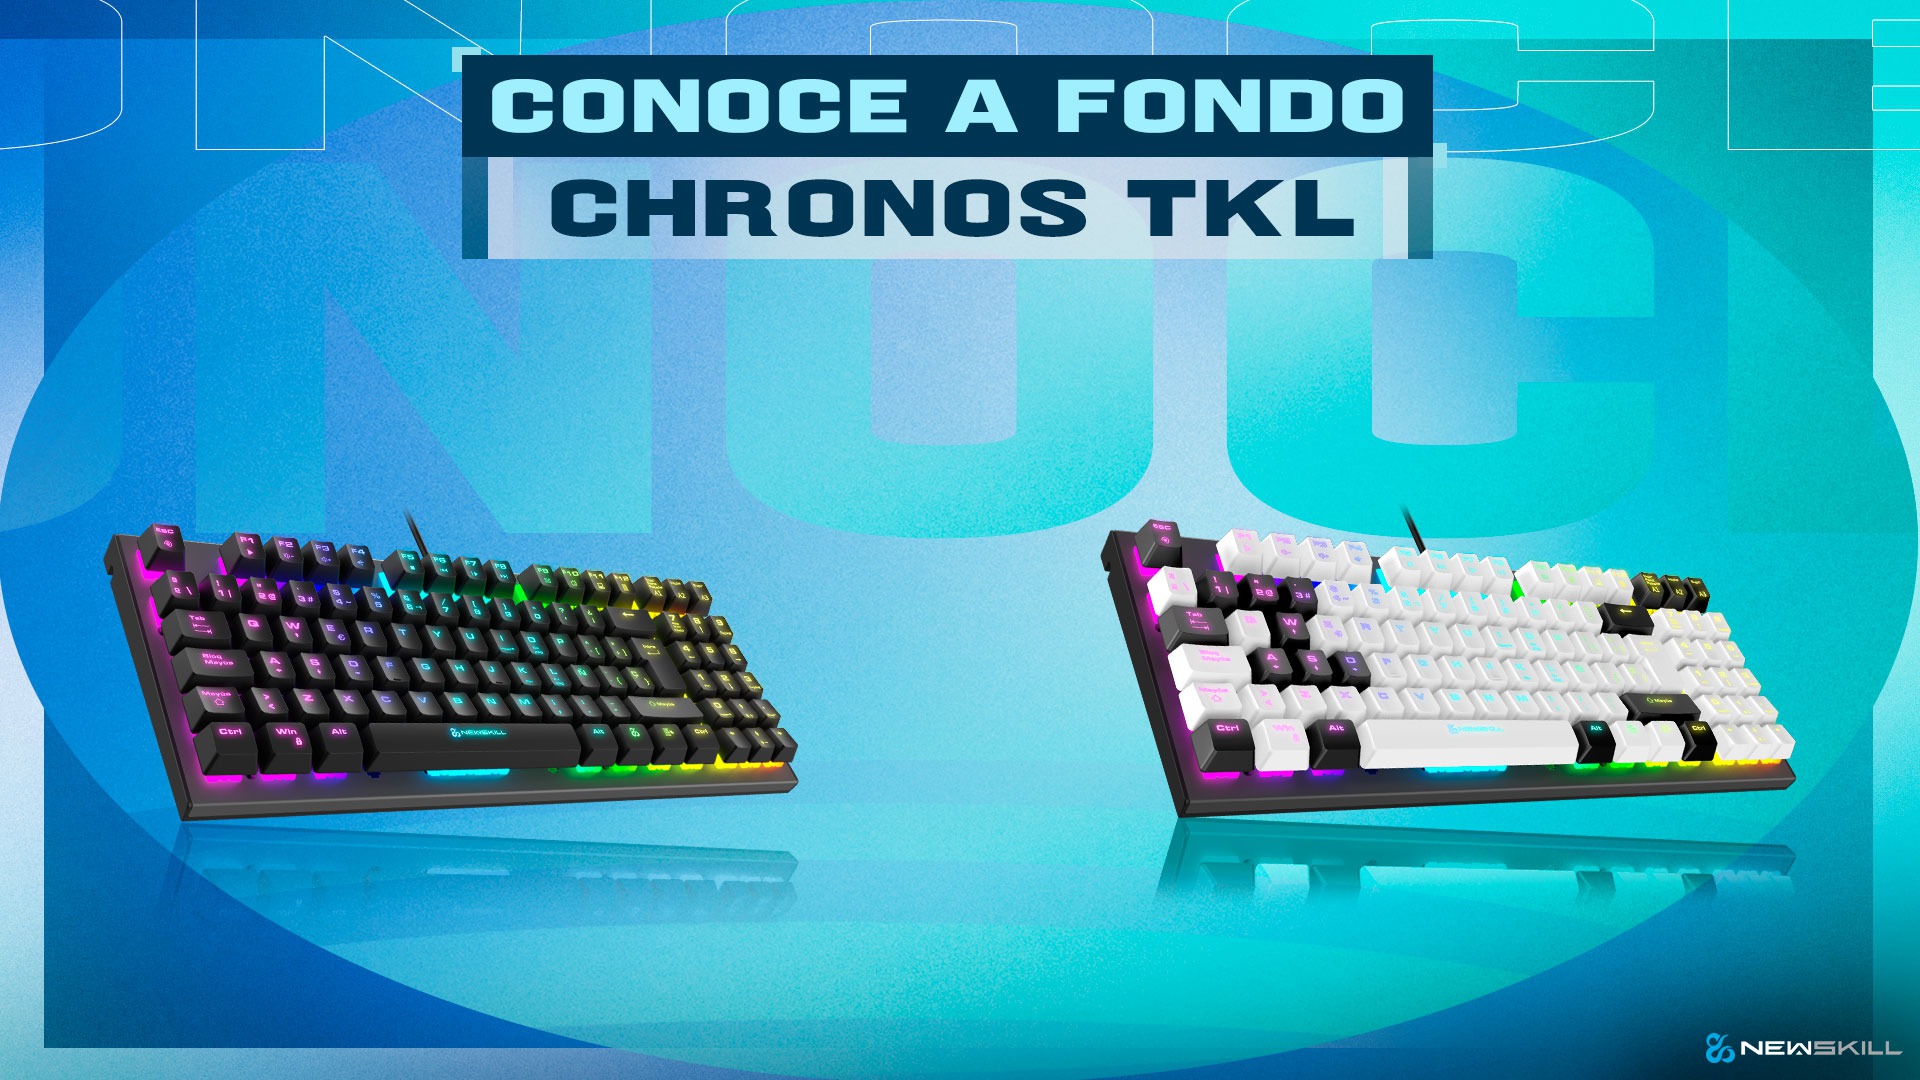 Get to know Chronos TKL in depth